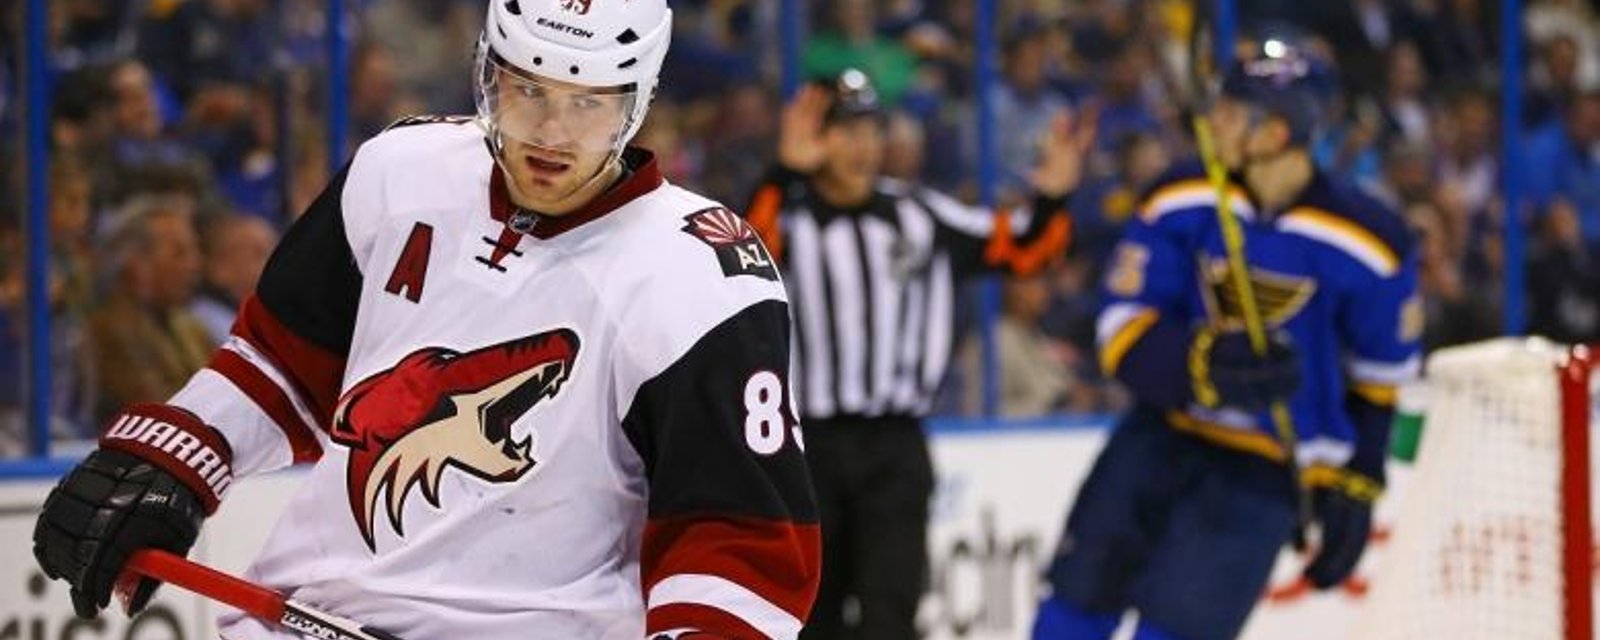 Breaking: Coyotes have reportedly decided to trade one of their young stars.